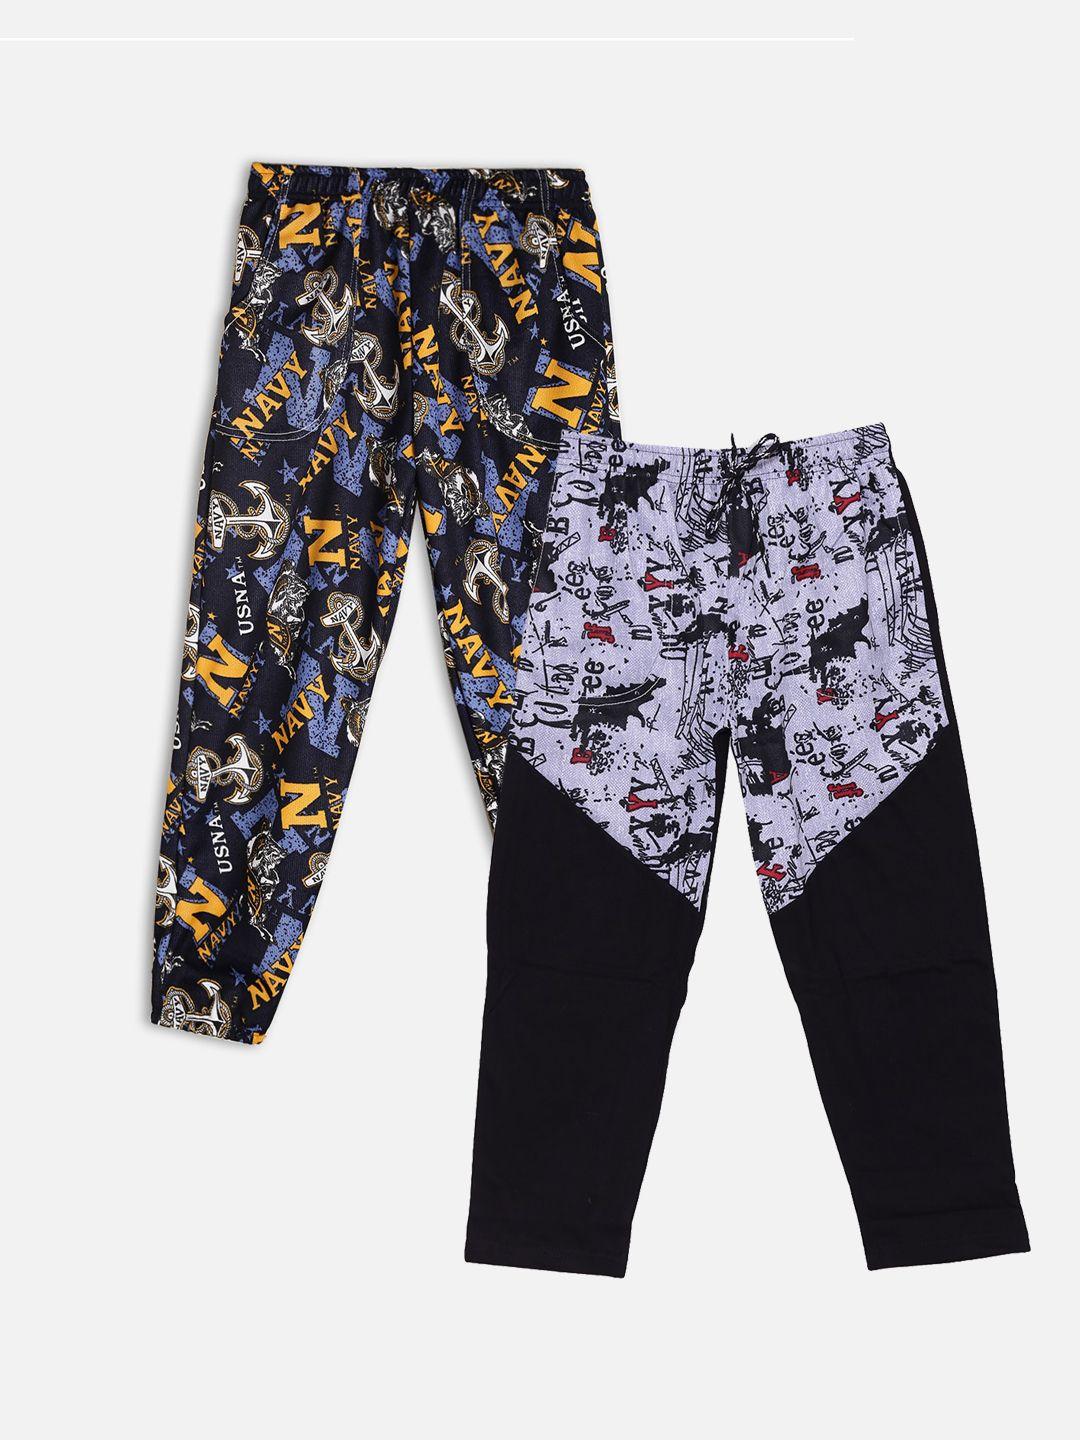 fashionable boys pack of 2 printed track pants